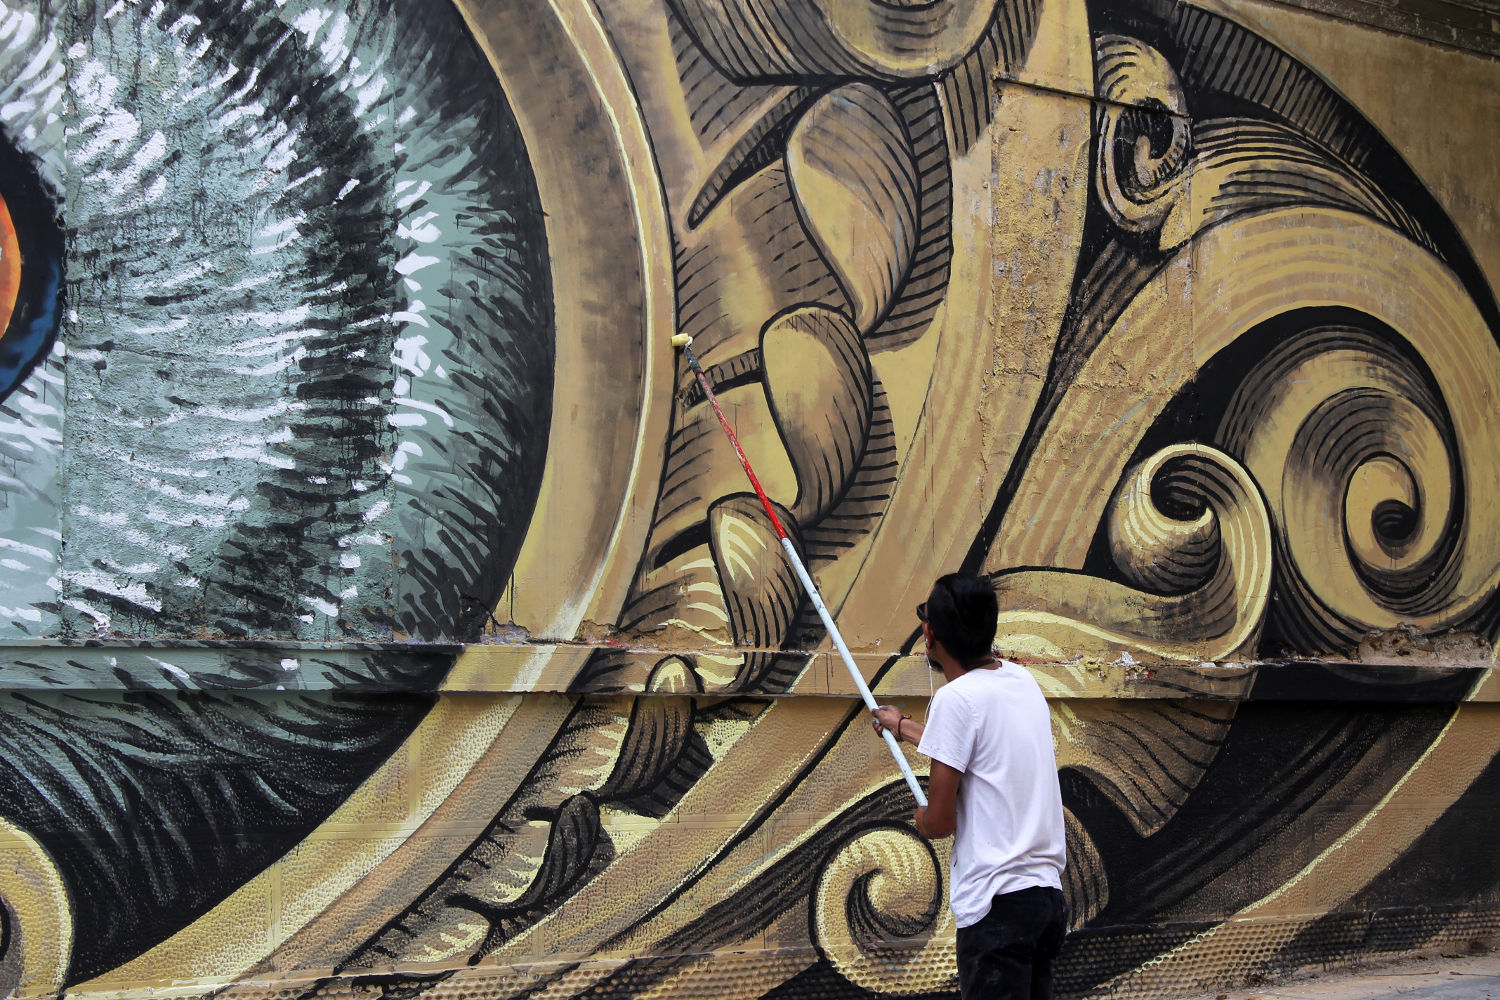 WD's latest mural "Knowledge speaks - Wisdom listens" goes viral